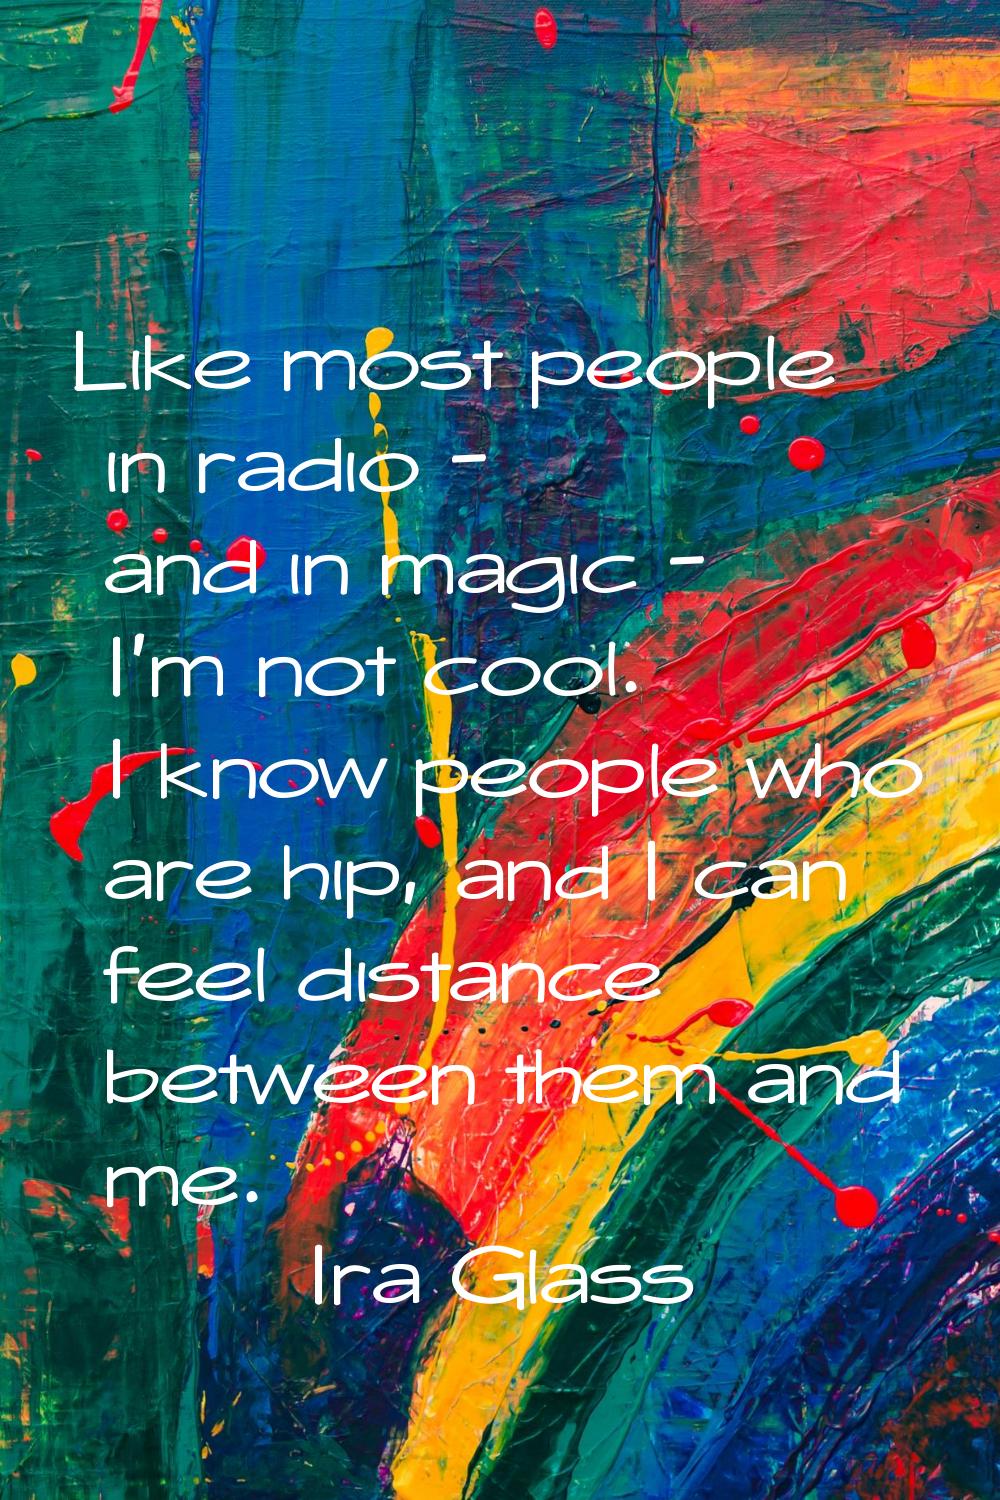 Like most people in radio - and in magic - I'm not cool. I know people who are hip, and I can feel 